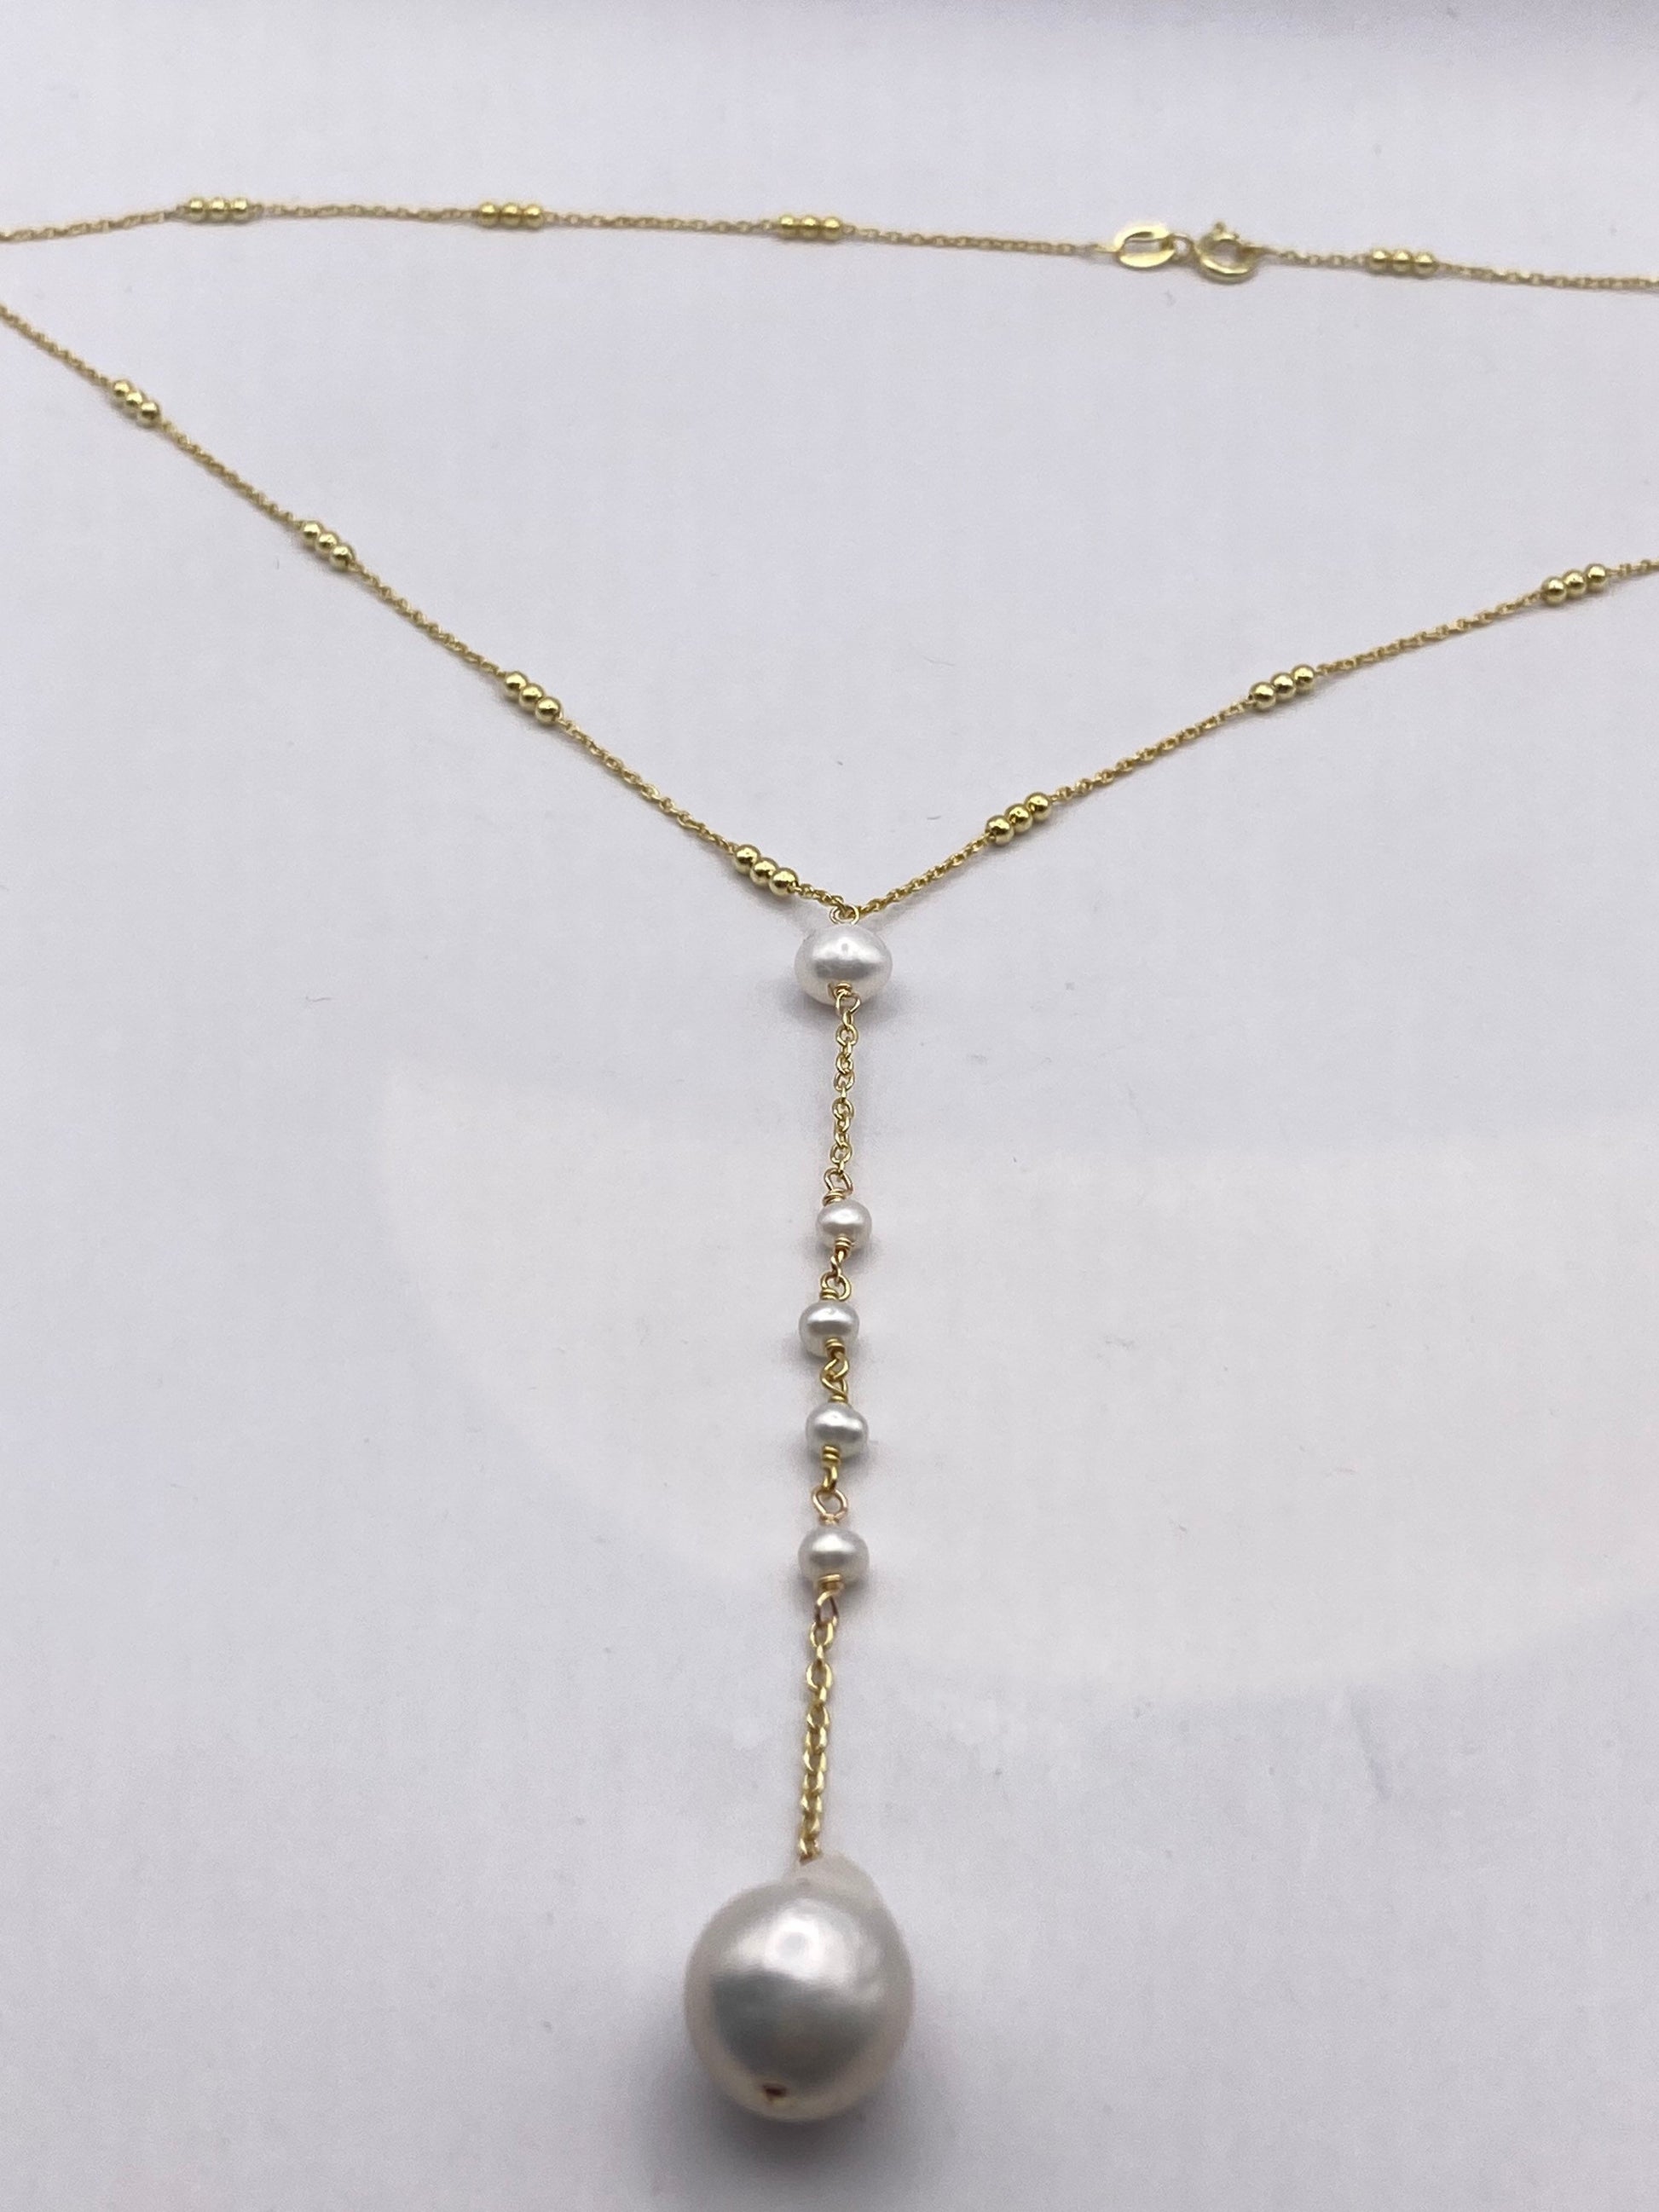 Vintage Golden 925 Sterling Silver White Pearl Pendant 16 inch Y necklace